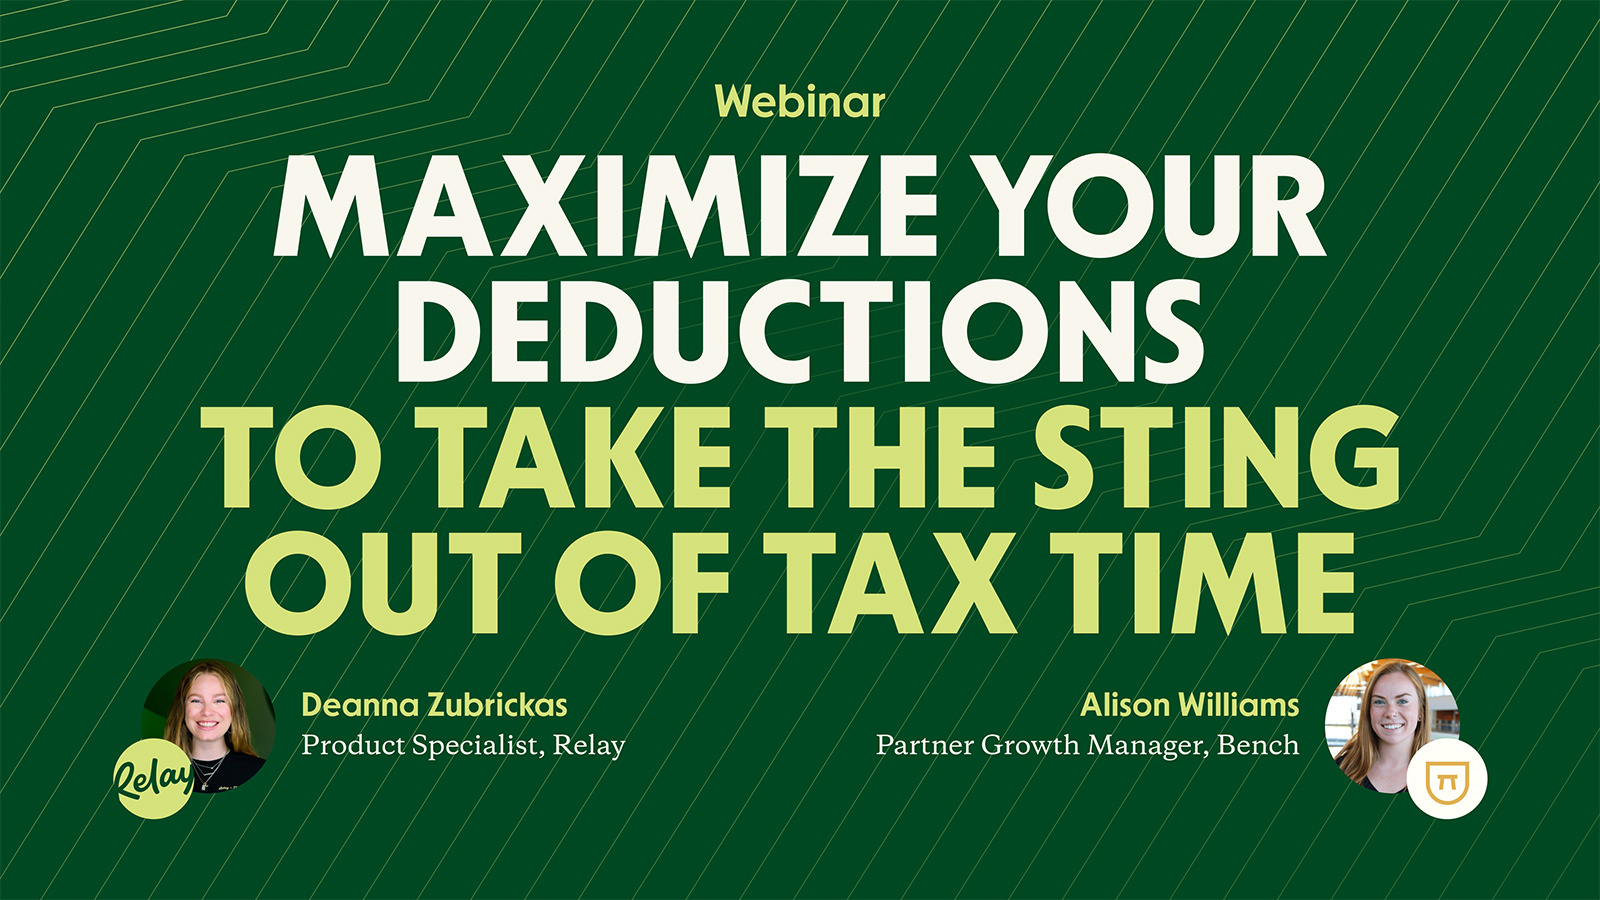 Webinar - Maximize your deductions to take the sting out of tax time 